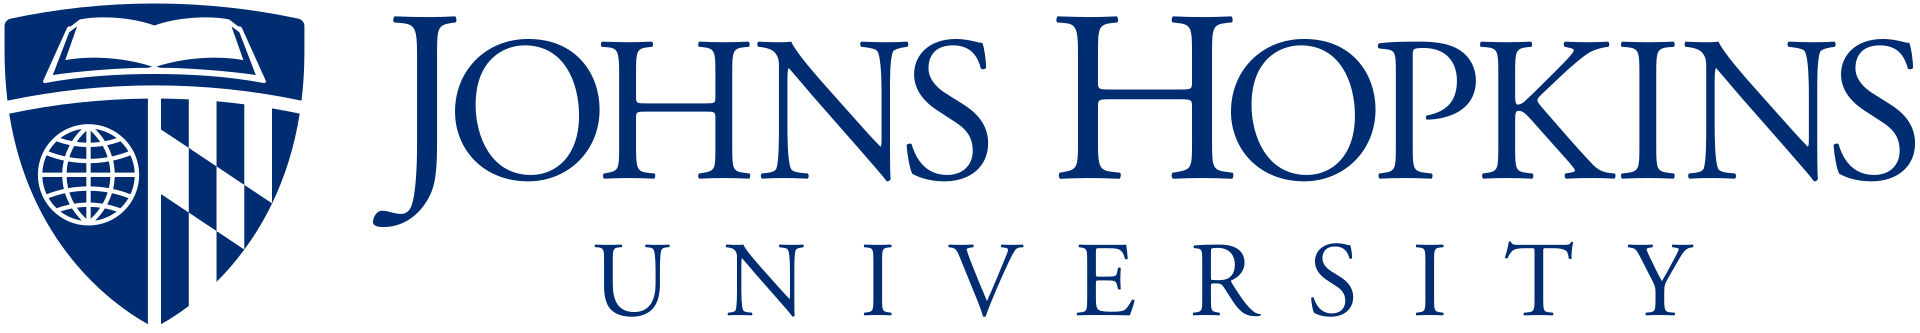 Johns Hopkins University logo, By Source, Fair use, https://en.wikipedia.org/w/index.php?curid=52649215"